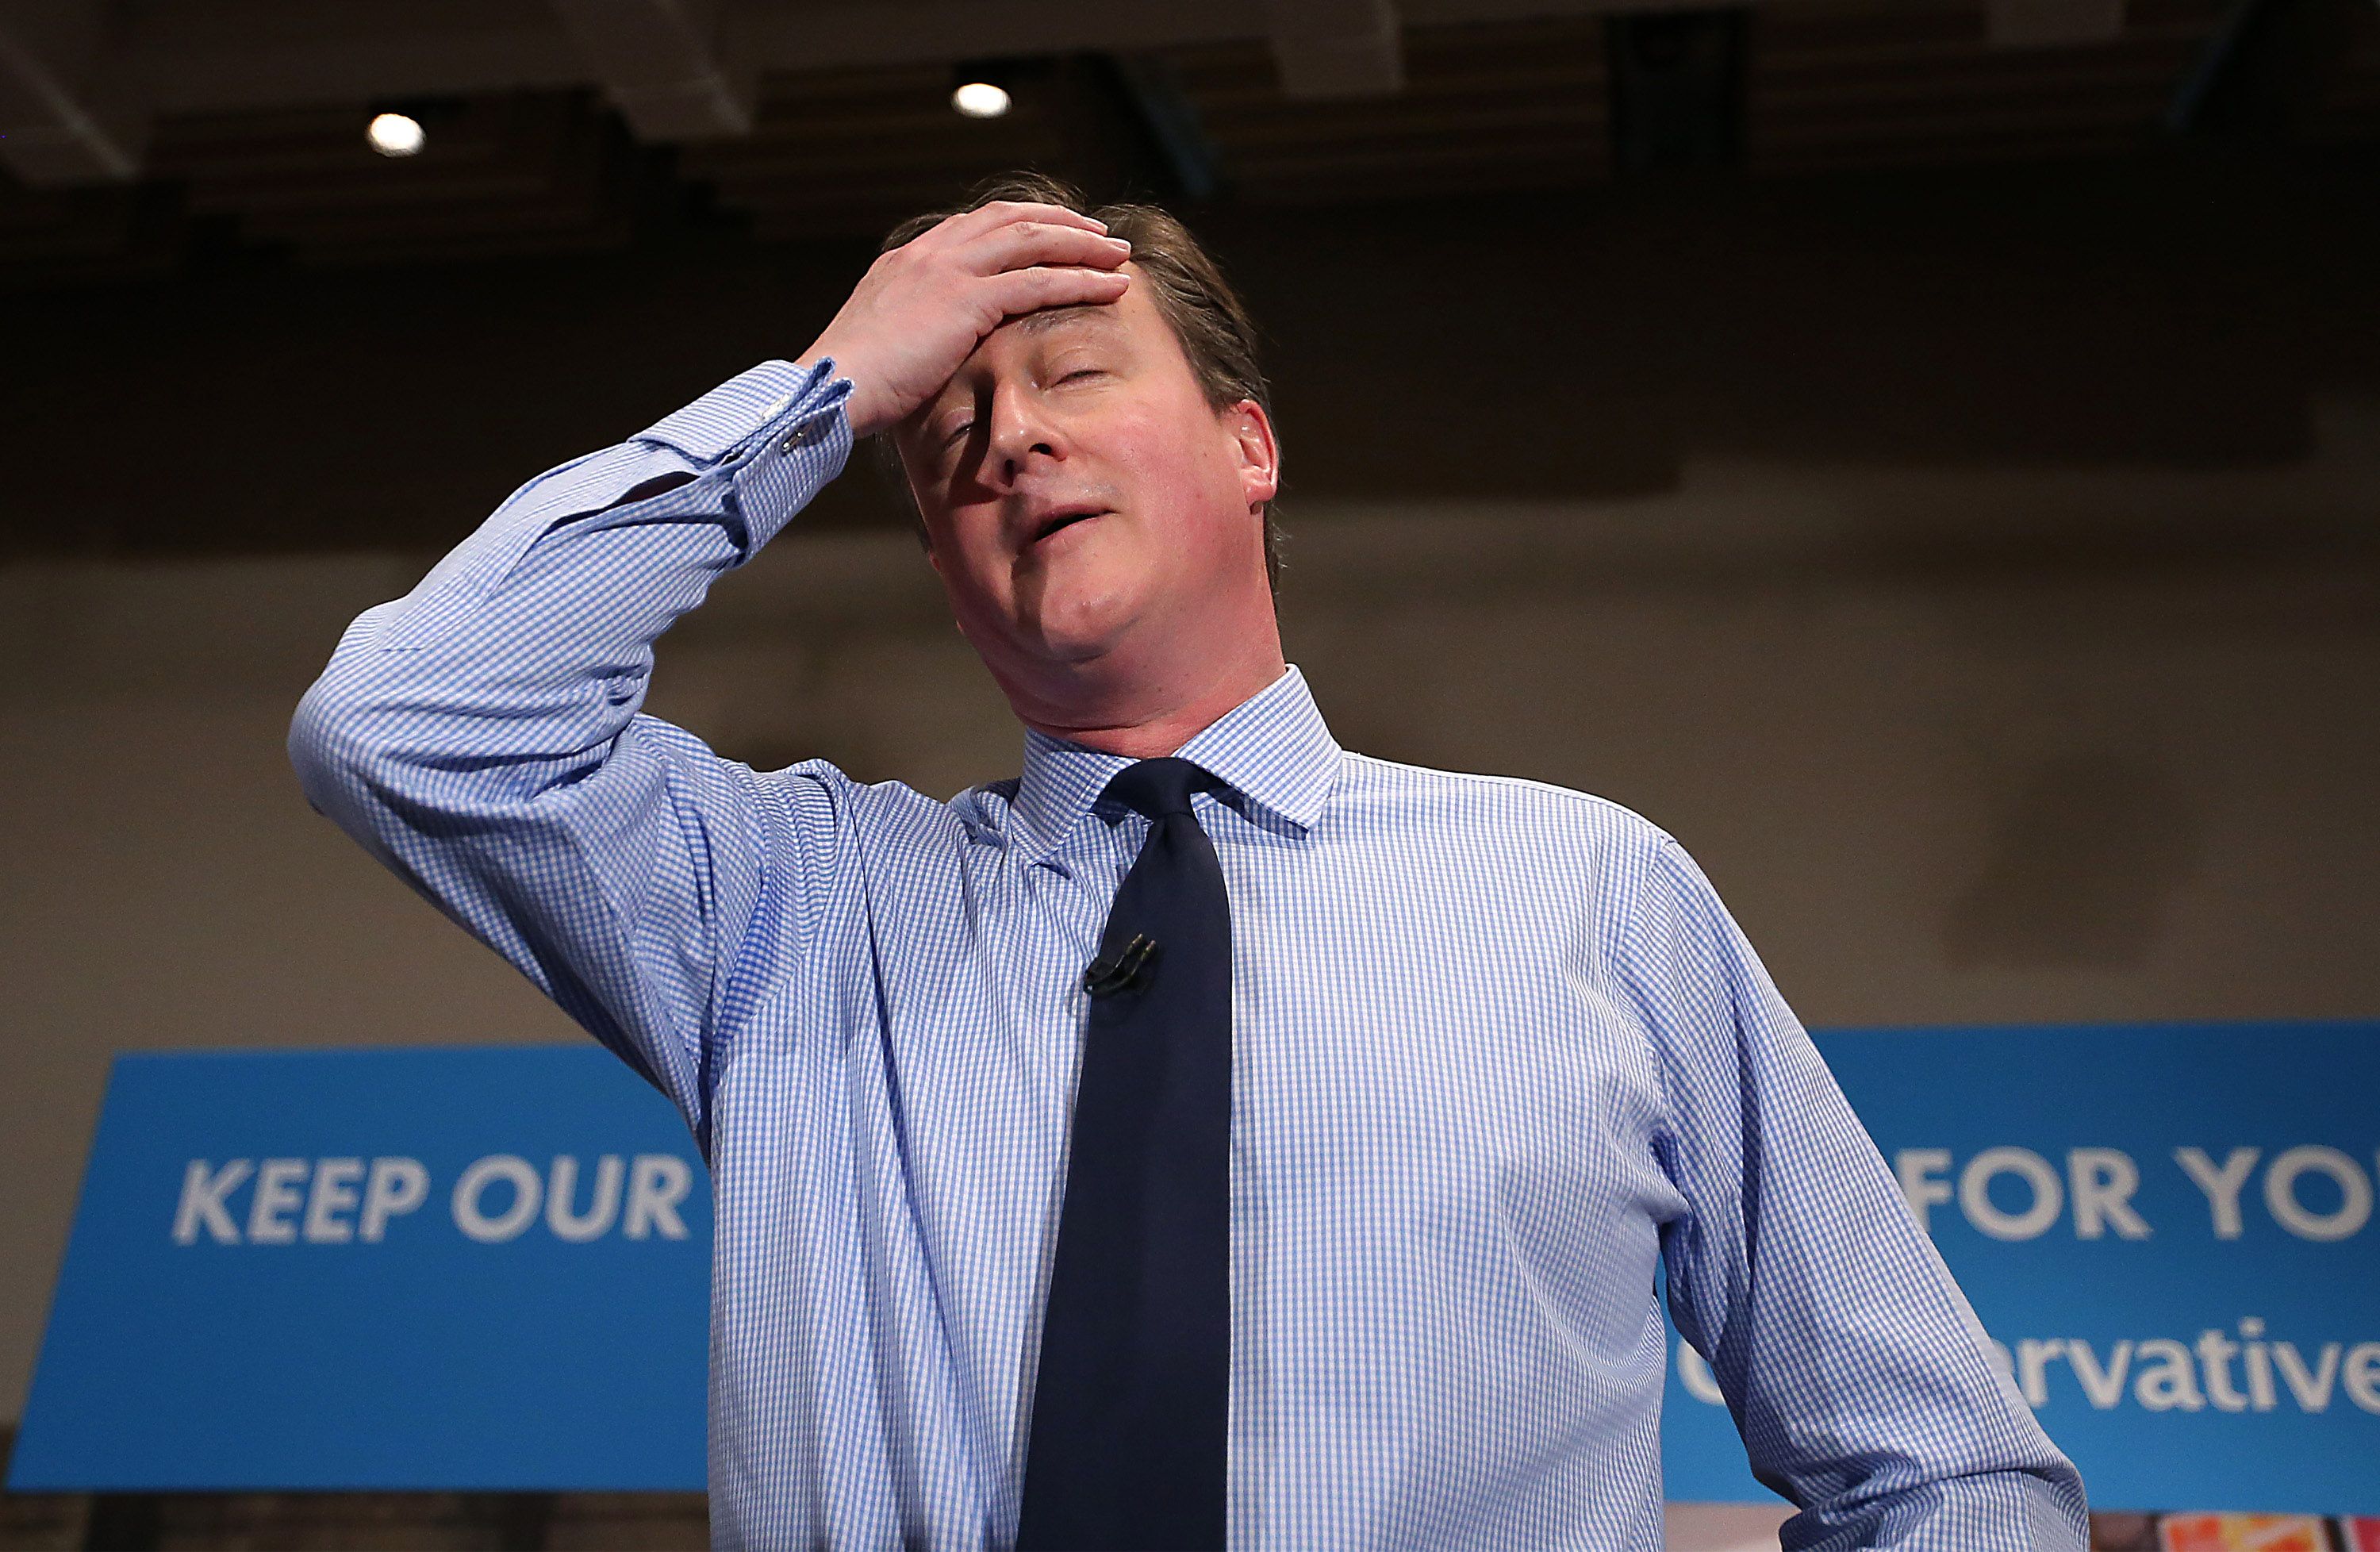 LONDON, ENGLAND - APRIL 27:  Prime Minister David Cameron wipes away some sweat as he speaks to business leaders on April 27, 2015 in London, England. Mr Cameron has started the fifth week of the general election campaign with a passionate speech in the heart of the City of London financial district.  (Photo by Peter Macdiarmid/Getty Images)